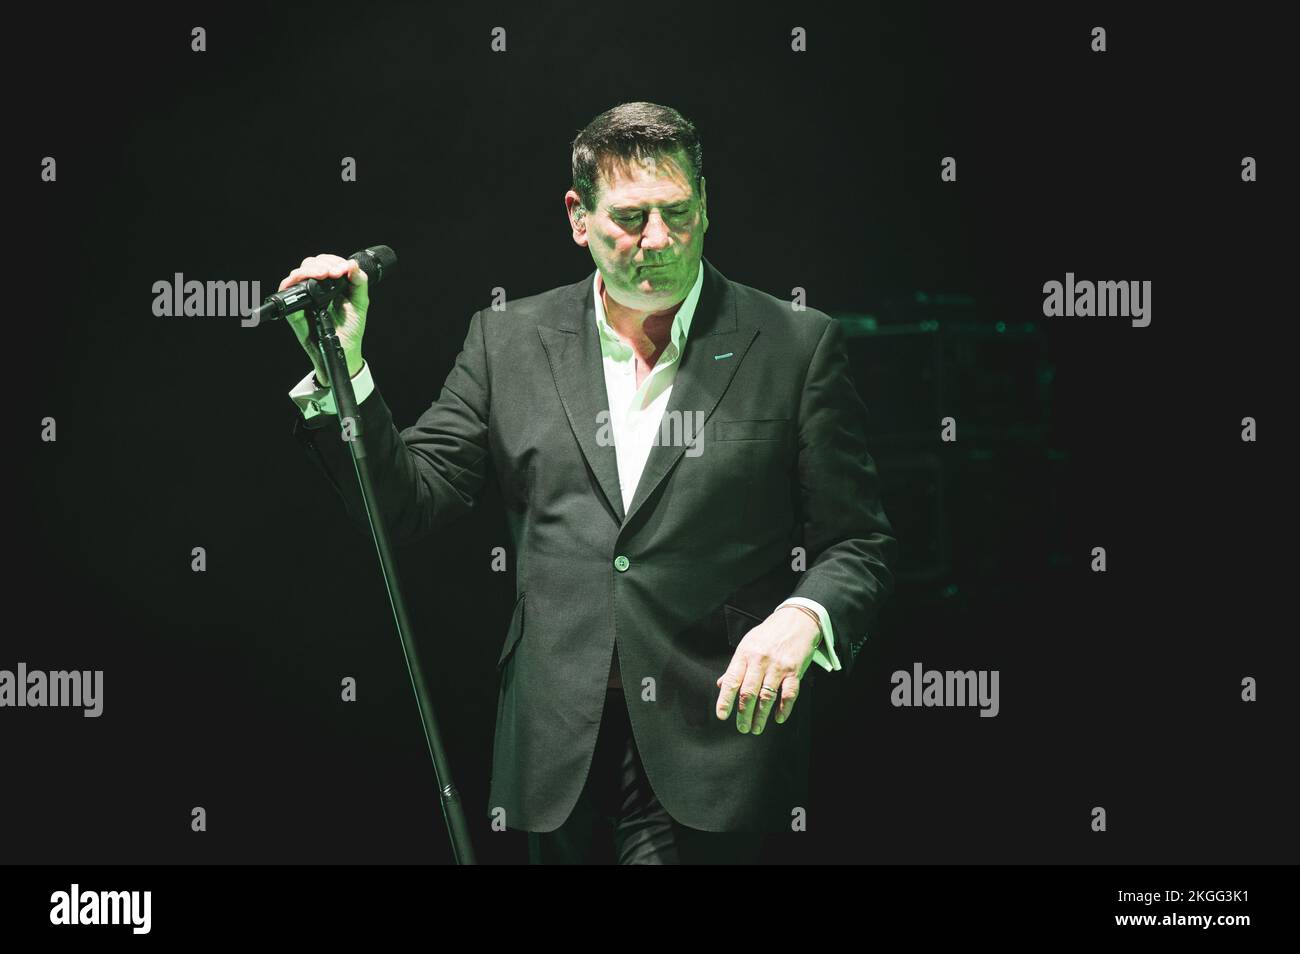 ITALY, TURIN, NOVEMBER 22ND 2022: The British pop singer Tony Hadley, former lead singer of the New Romantic band Spandau Ballet, performing live on stage for his “40TH anniversary” tour, together with “The Fabolous TH Band”. Stock Photo